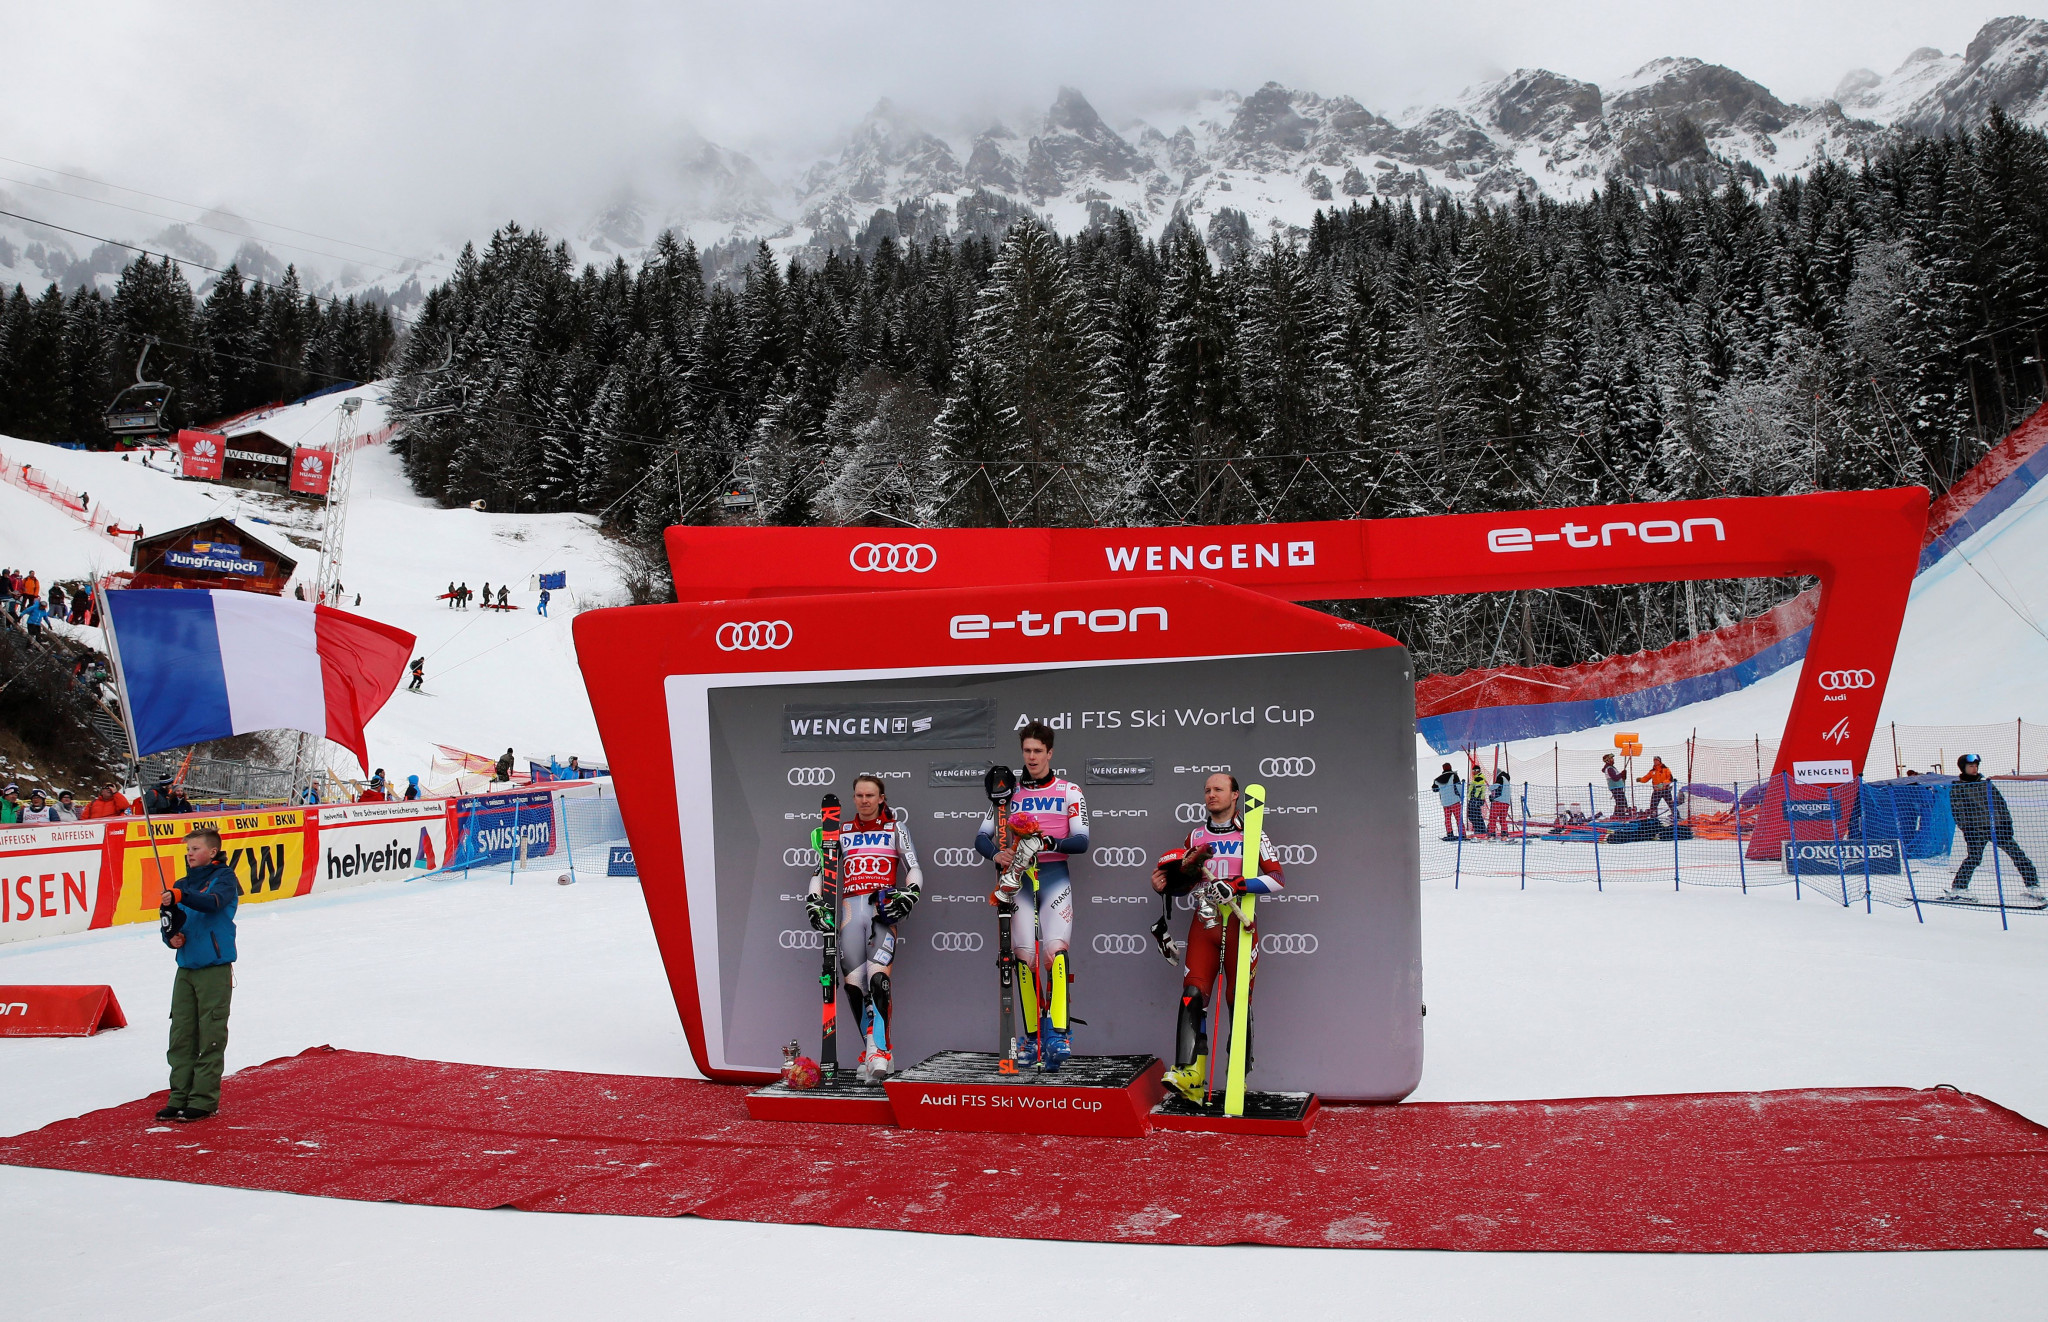 FIS Alpine Ski World Cup in Wengen cancelled due to rise in COVID-19 cases